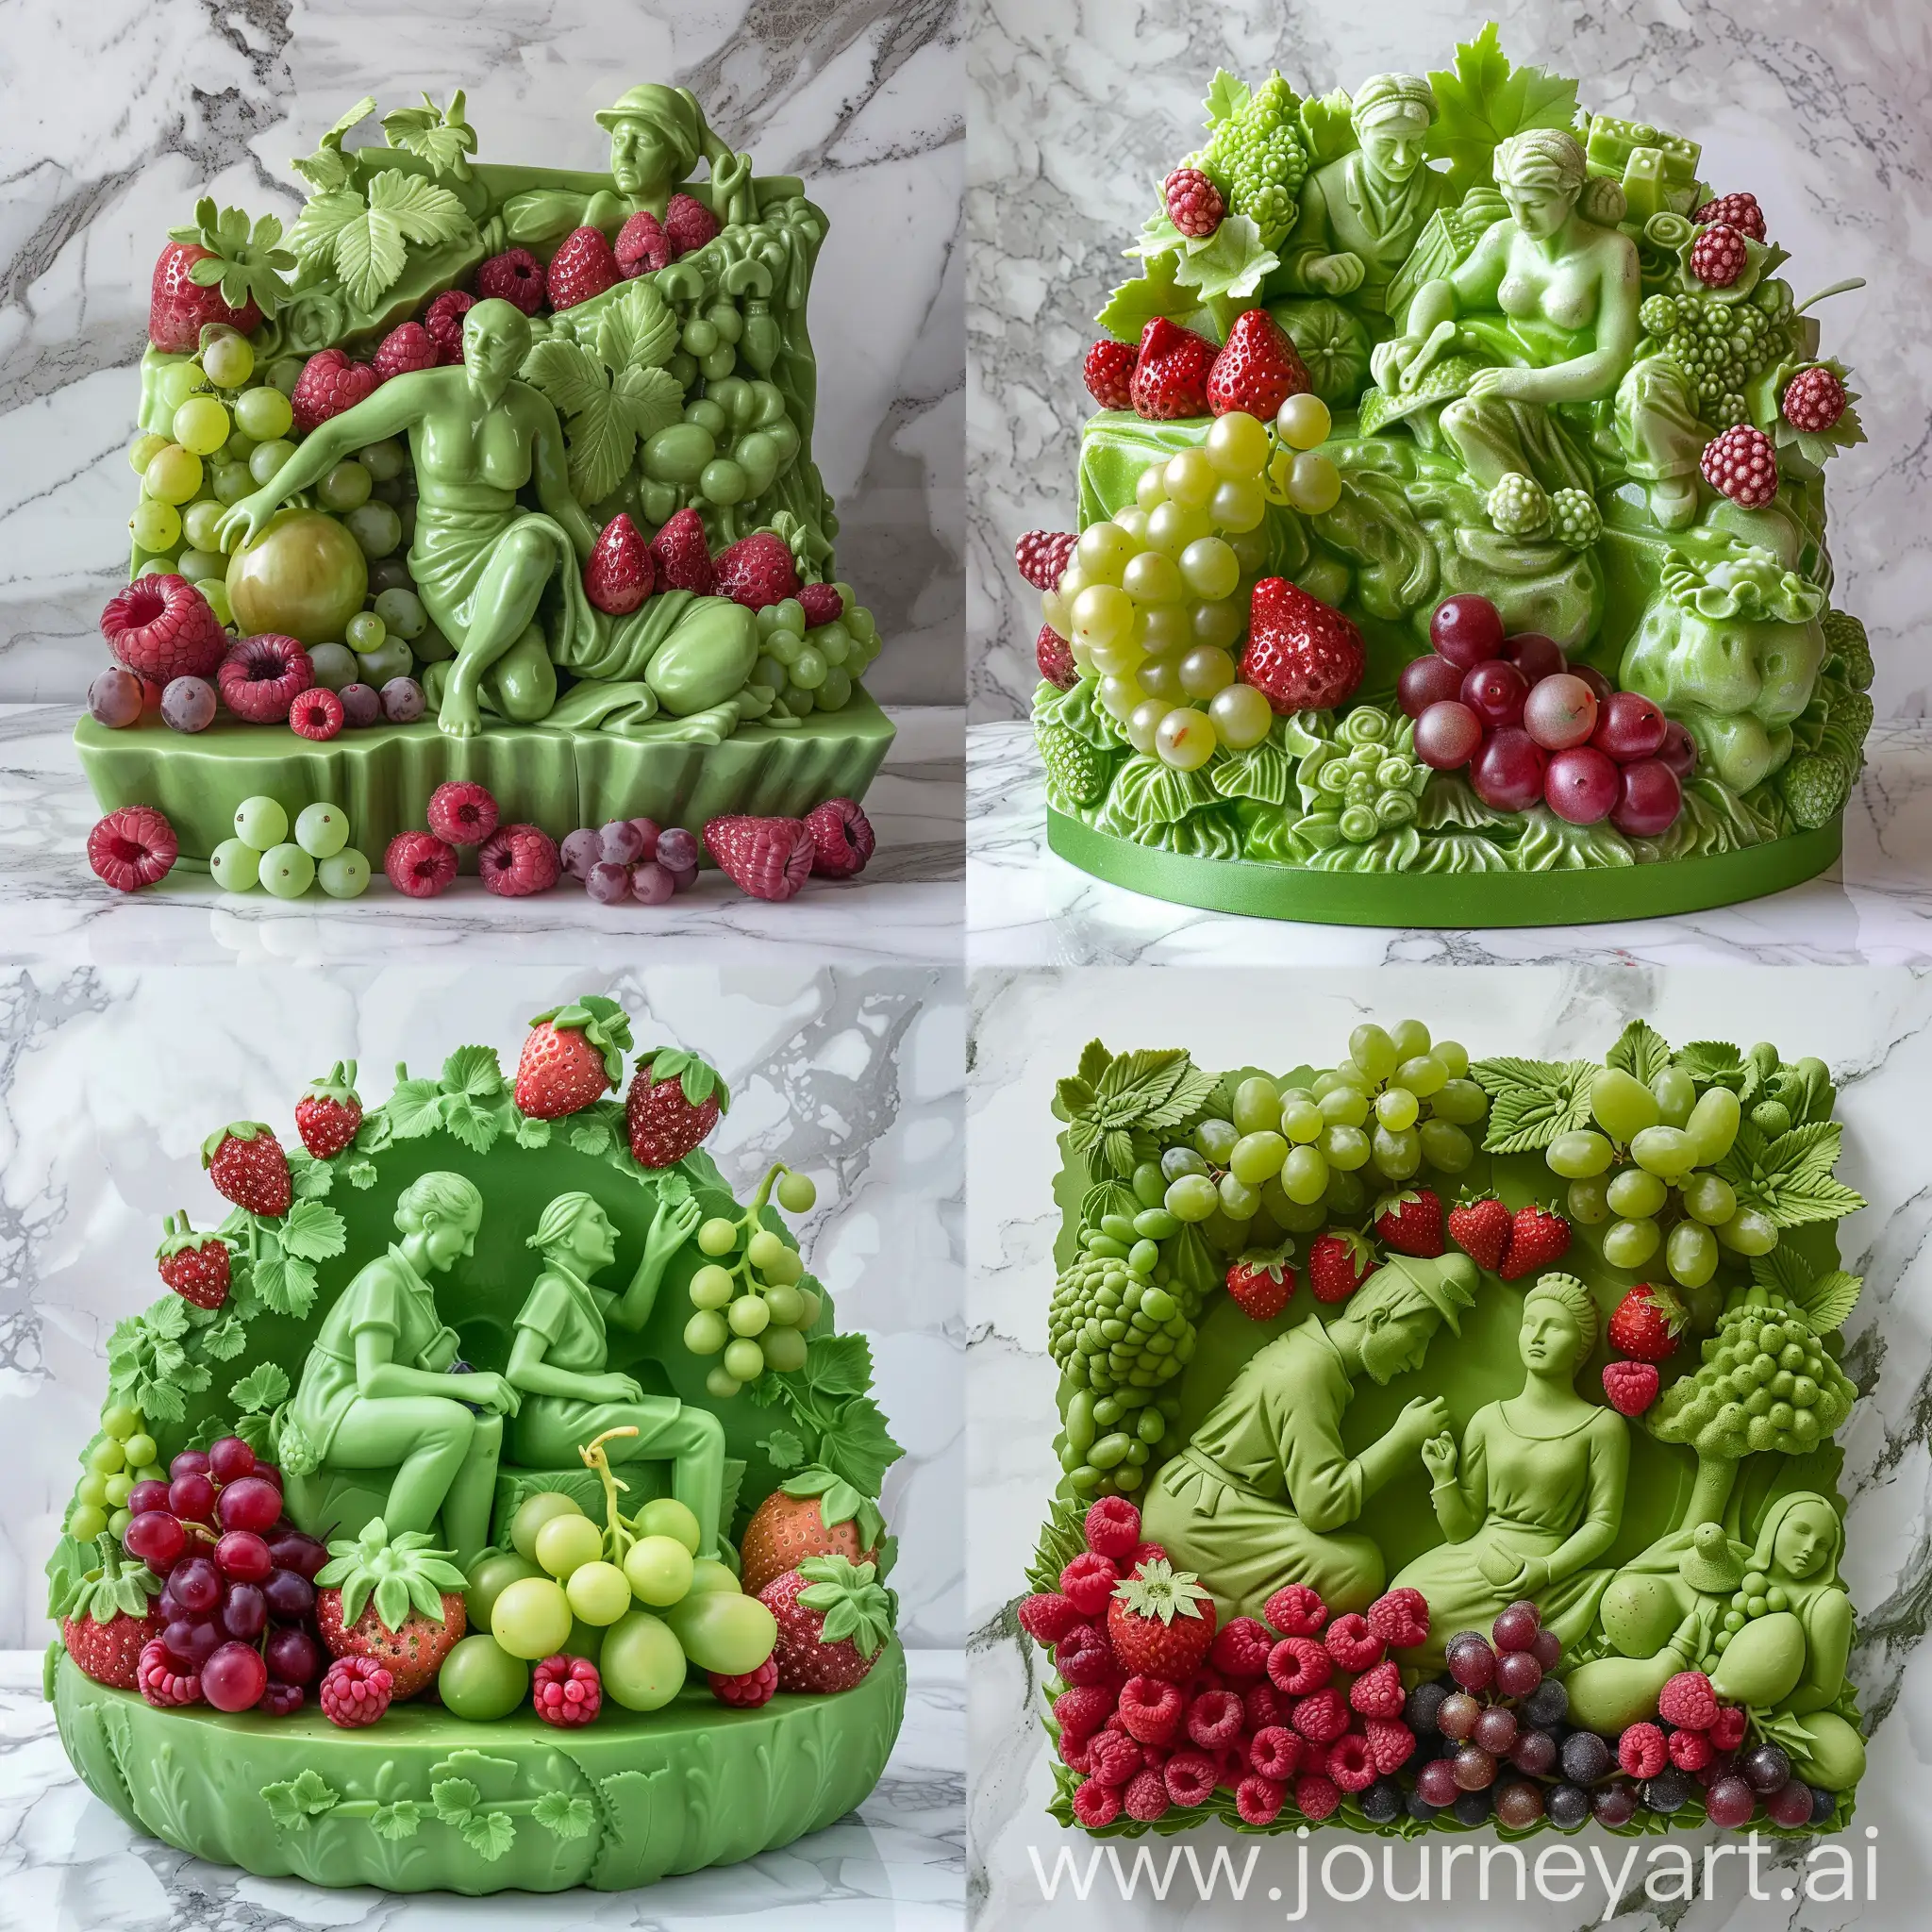 Sculpture-Worker-and-Kolkhoz-Woman-as-Green-Cake-with-Berries-on-Marble-Background